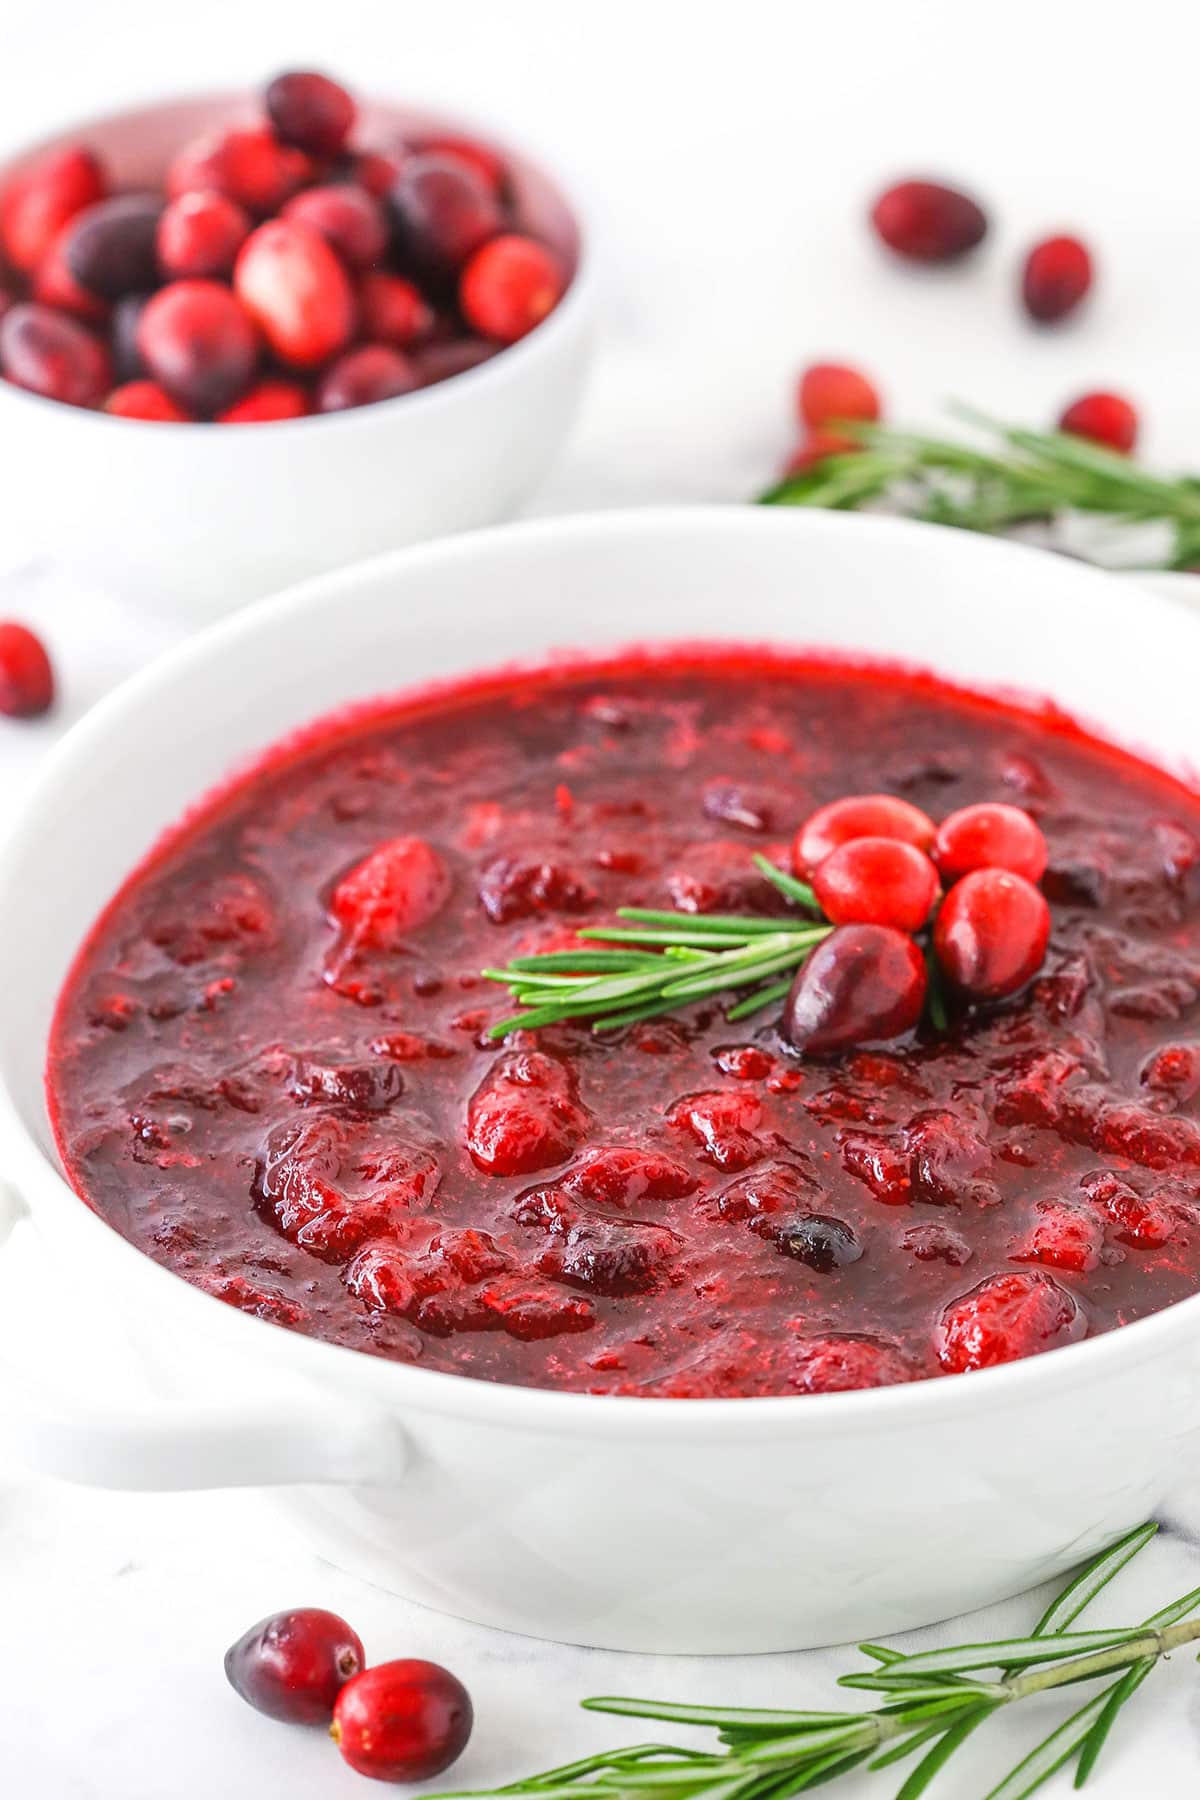 Easy homemade Cranberry Sauce in a white bowl on a white table